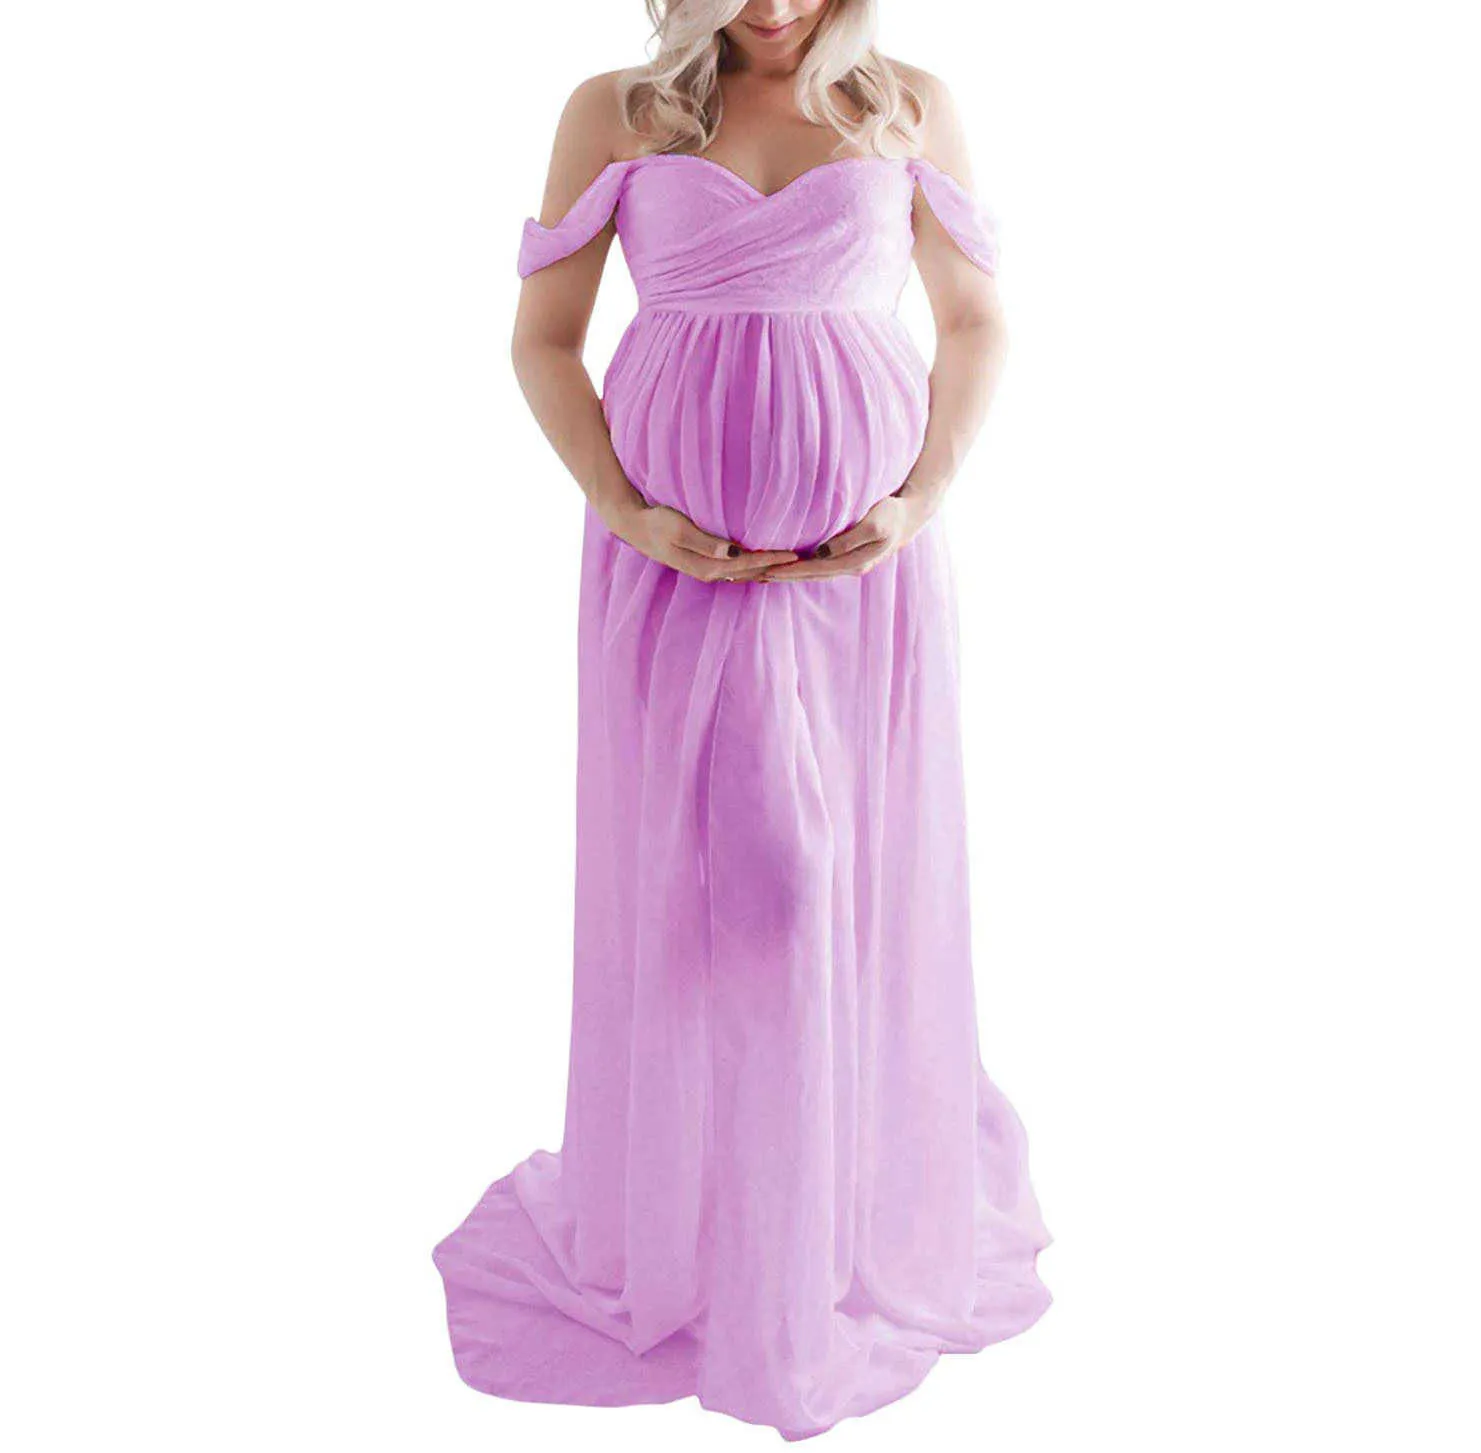 New Maternity Dresses For Photo Shoot Pregnant Women Opening Mop Long Skirt Dress Before Taking Pictures Pregnancy Wear